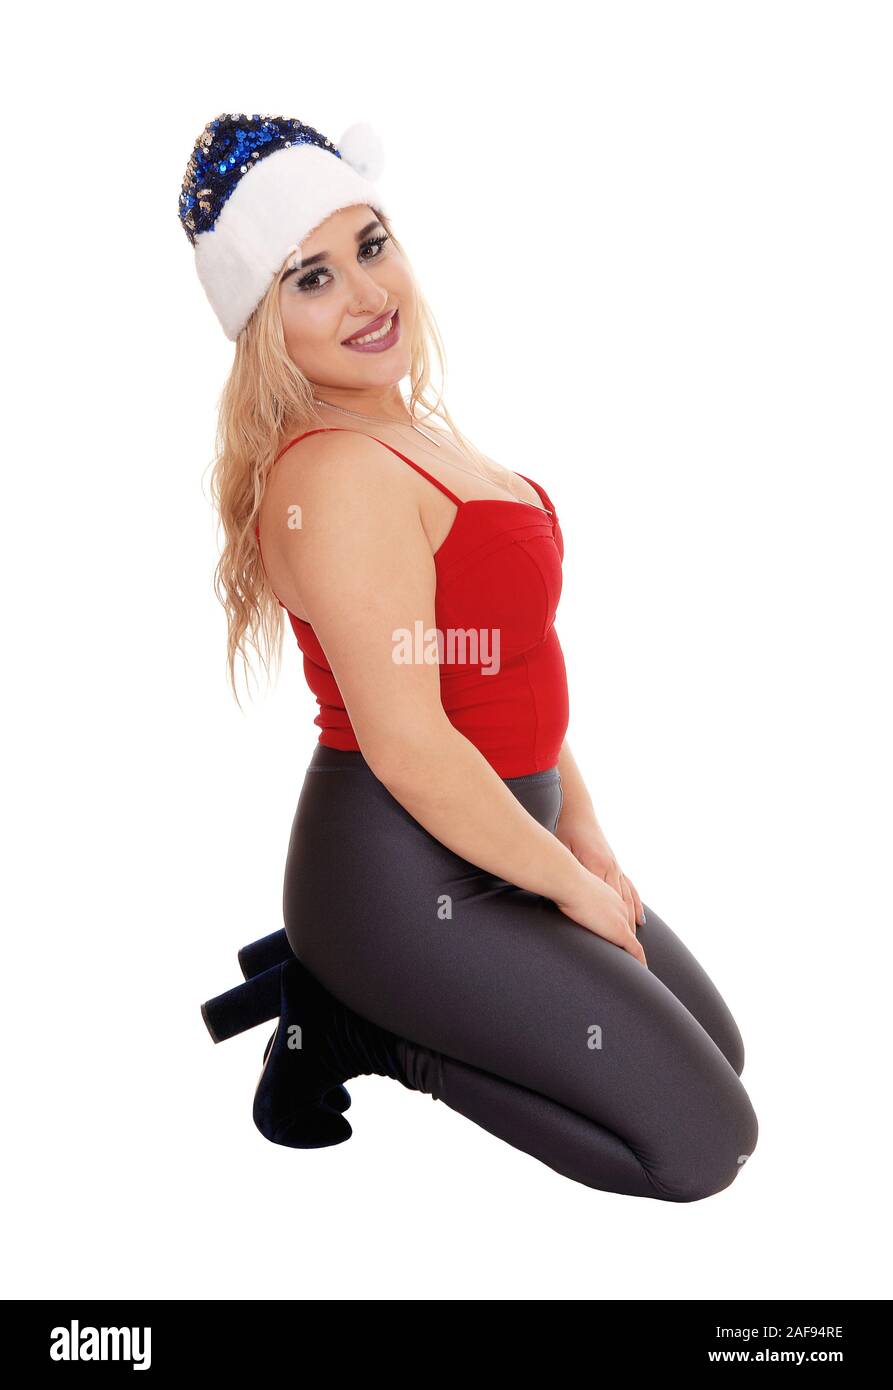 Beautiful young woman kneeling on the floor in a red top and gray  tights with a Santa hat, isolated for white background Stock Photo